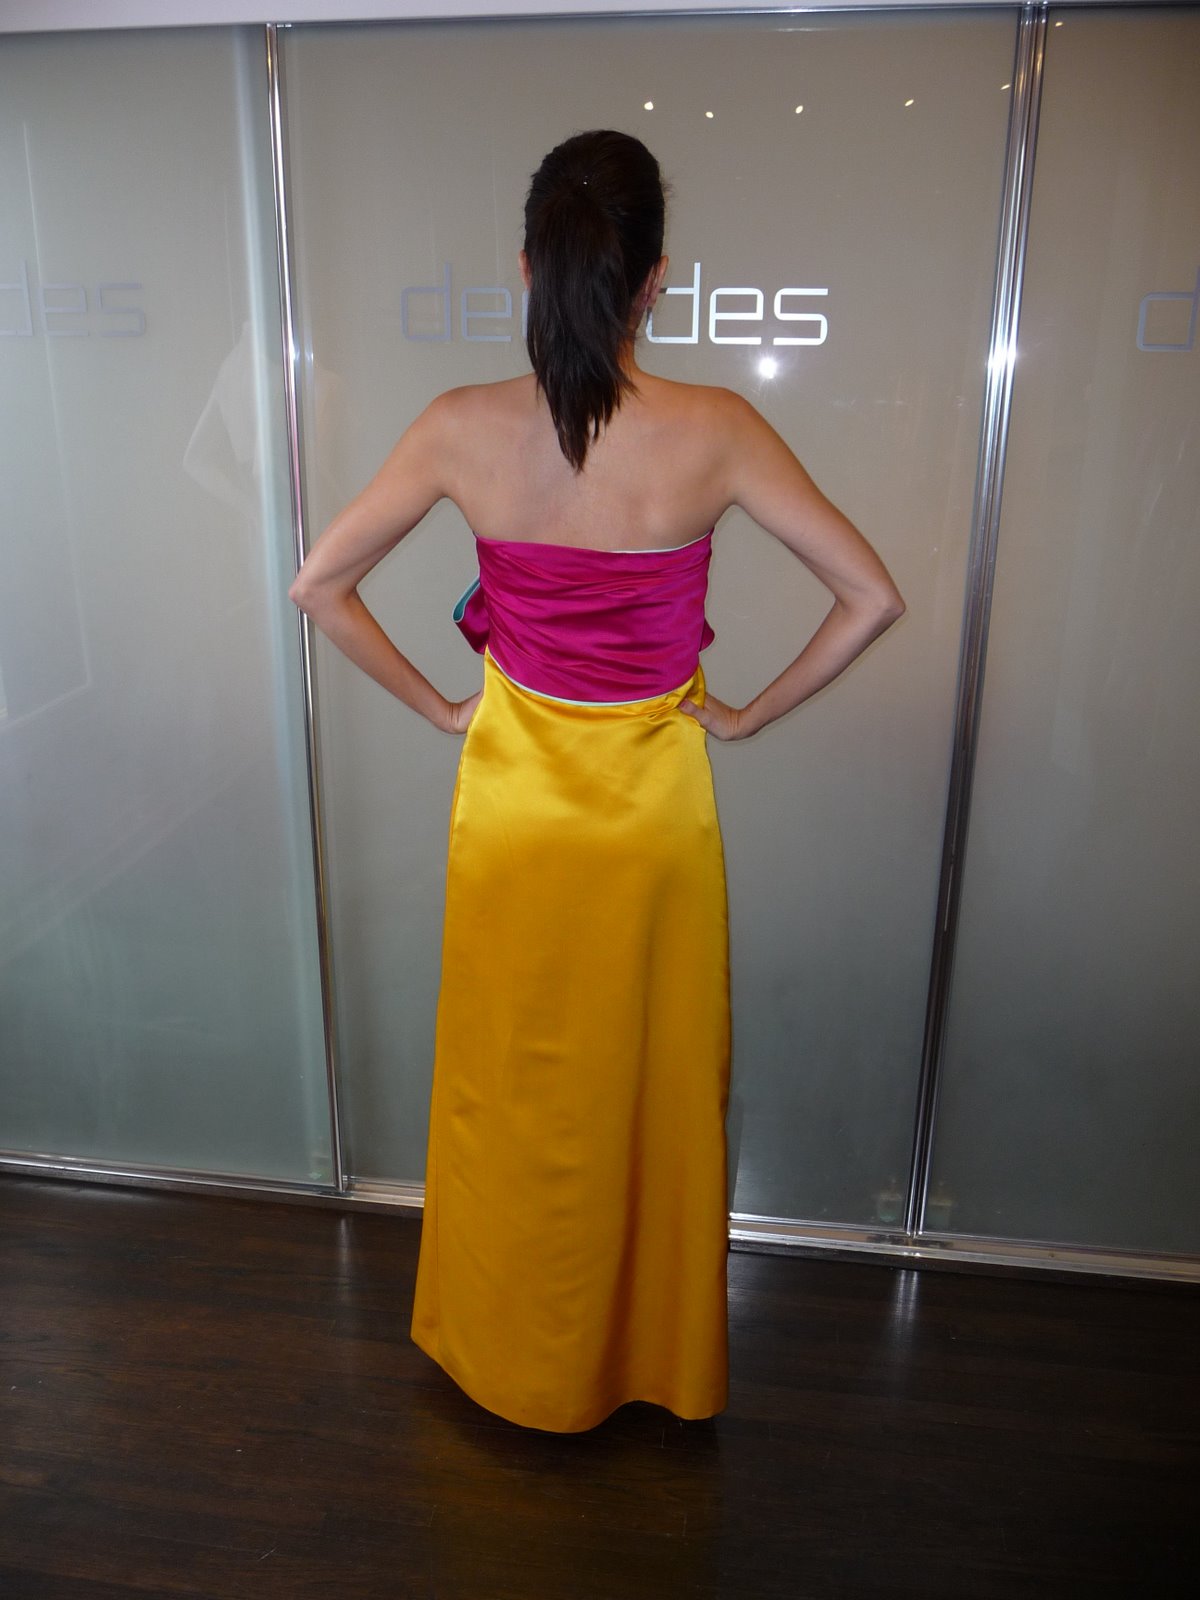 [BILL+BLASS+MARIGOLD+STRAPLESS+GOWN+WITH+HOT+PINK+AND+ICE+BOWNA+ND+CASCADE+C+80S.JPG+(1).JPG]